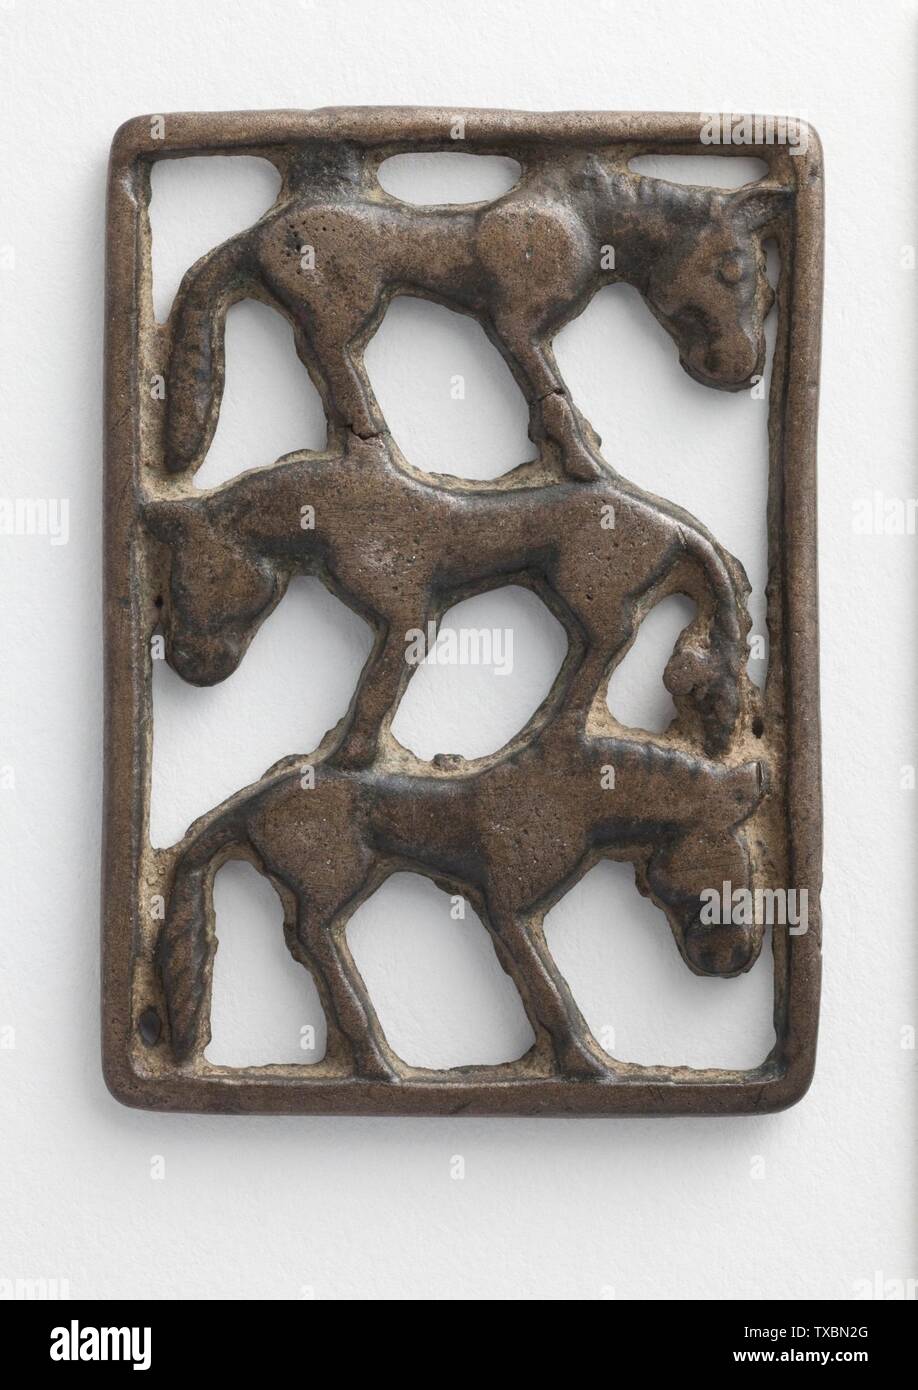 Plaque (Three Horses) (image 1 of 2);  Western Inner Mongolia or Northern China, 5th-4th century B.C. Sculpture; plaques Bronze The Nasli M. Heeramaneck Collection of Ancient Near Eastern and Central Asian Art, gift of The Ahmanson Foundation (M.76.97.697) Art of the Ancient Near East; 5th-4th century B.C.; Stock Photo